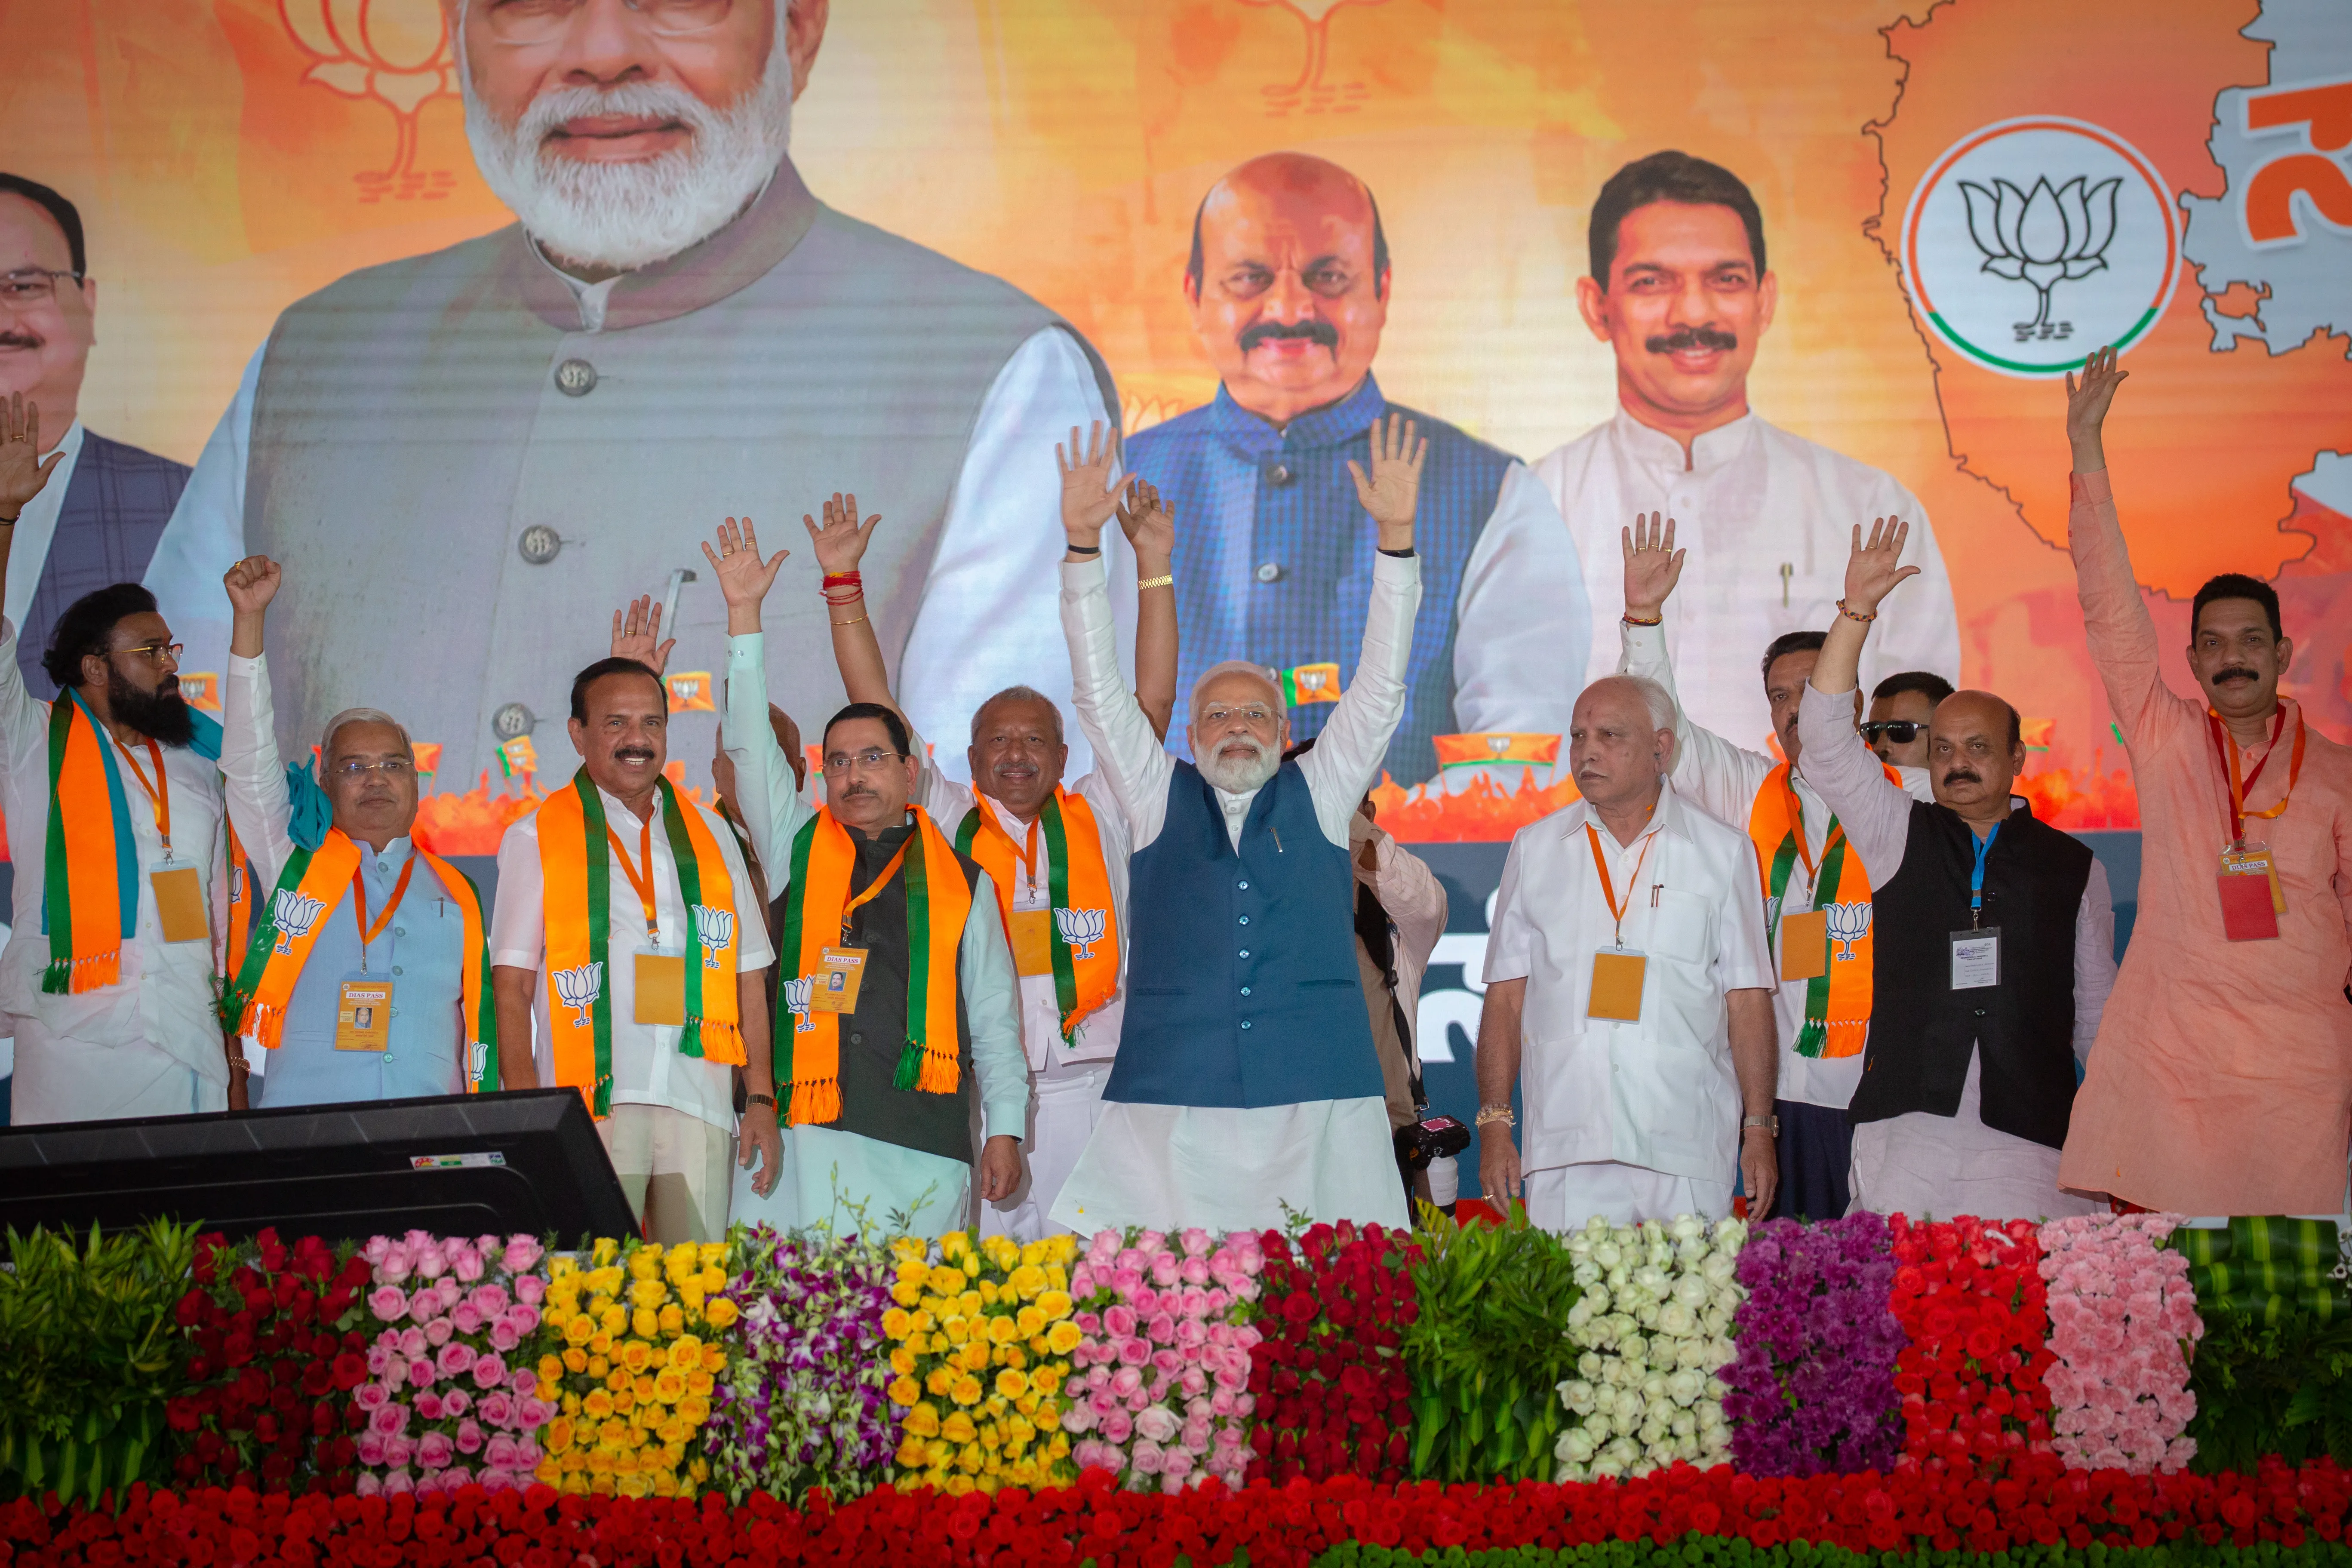 India's Prime Minister Narendra Modi waves to the his supporters during a political event organised by the Bharatiya Janata Party (BJP) at the GMIT College Grounds on March 25, 2023, in Davangere, India.?w=200&h=150